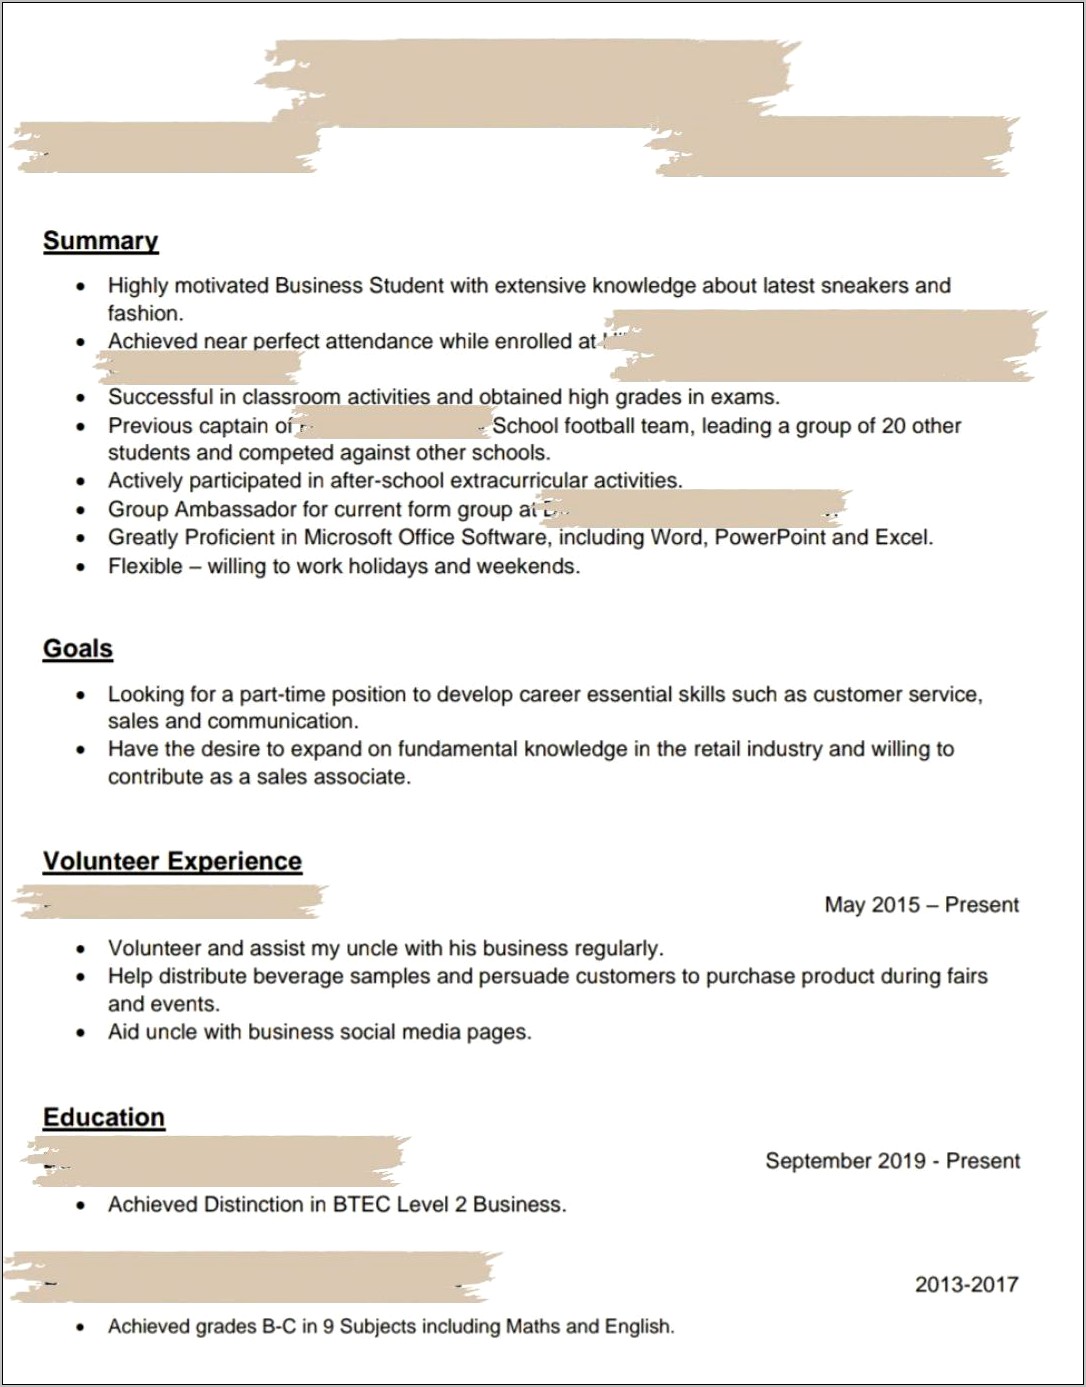 Resume For Retail Position No Experience